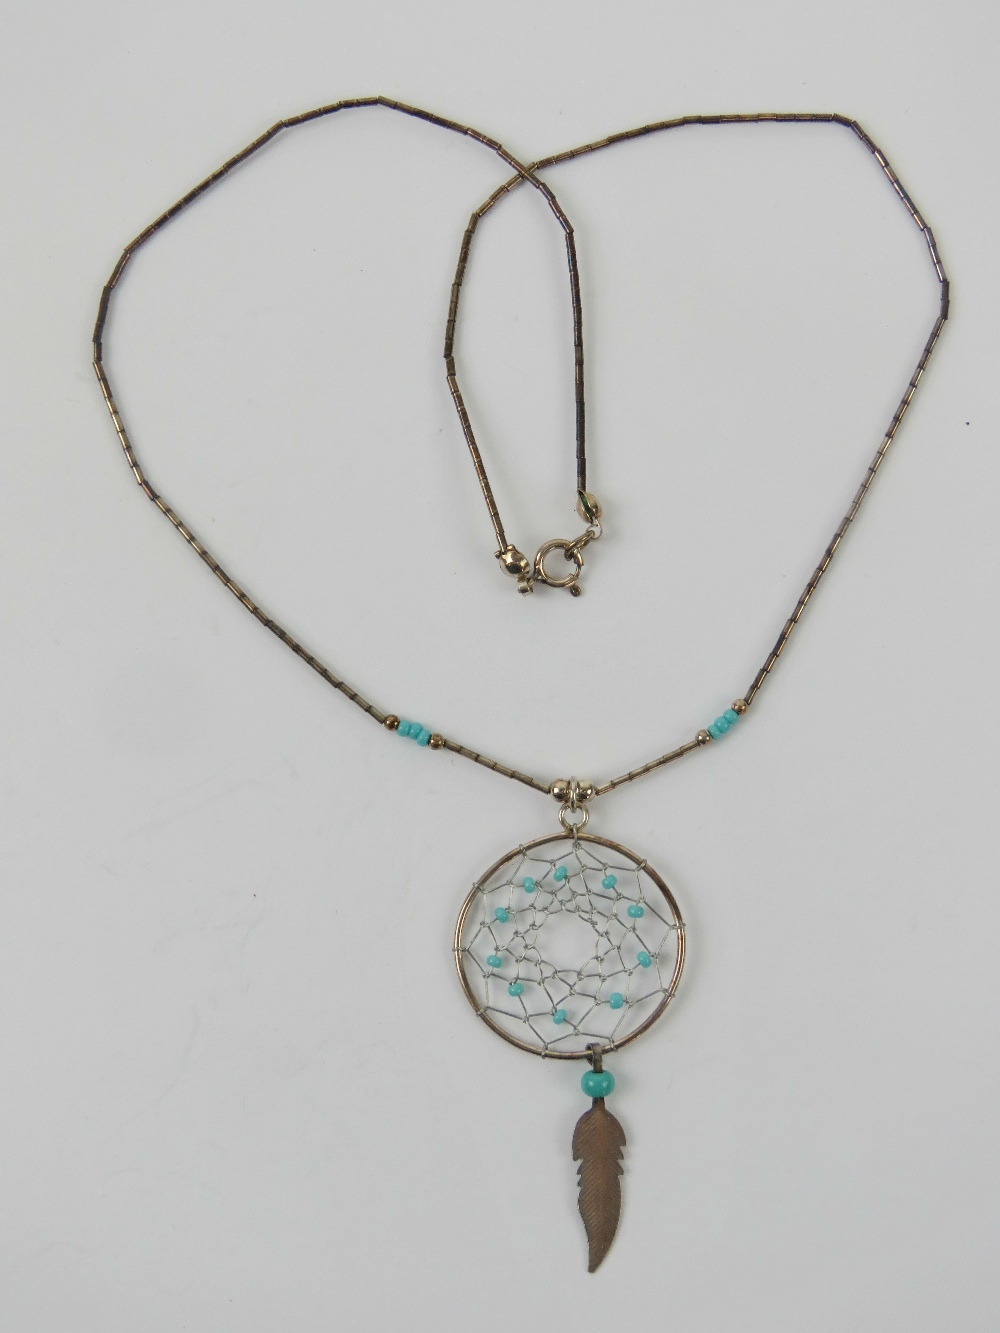 A Native American dream catcher necklace, Navajo style, stamped 925 to the clasp.